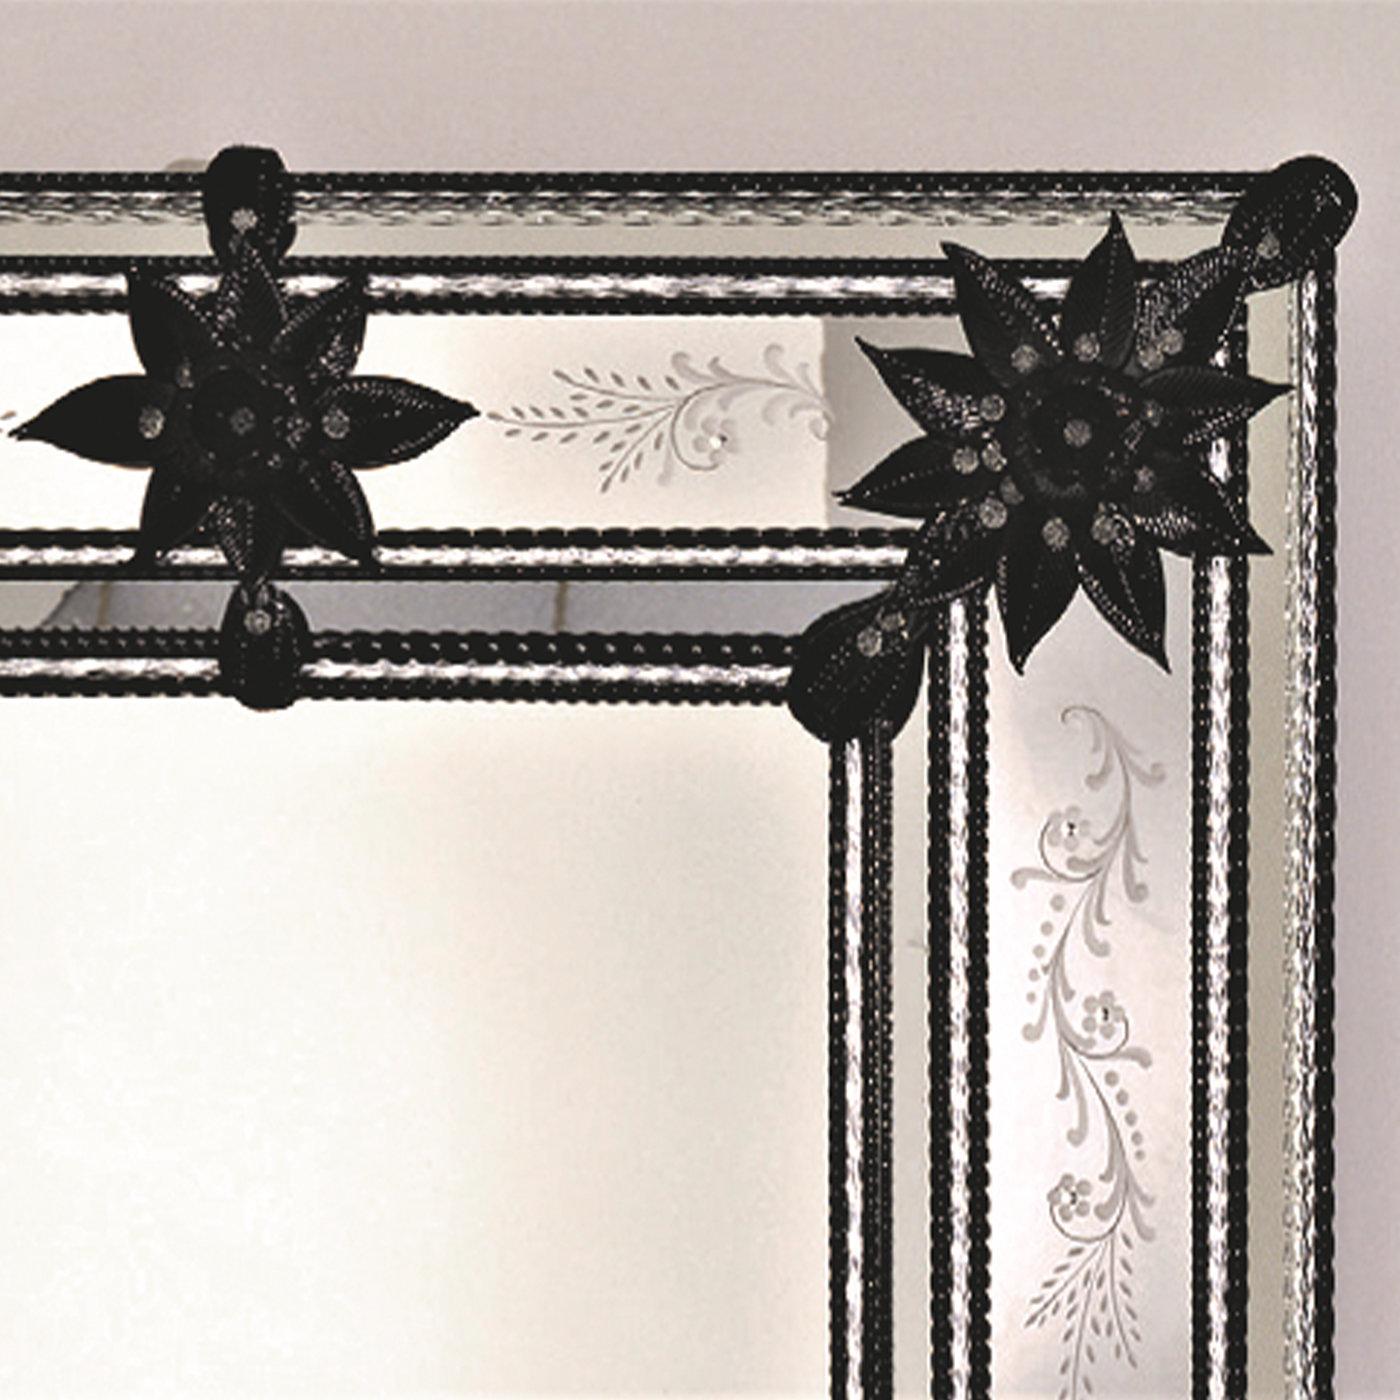 Venetian style mirror made in Murano glass and engraved by hand. The mirror features black leaves and flowers made of glass.